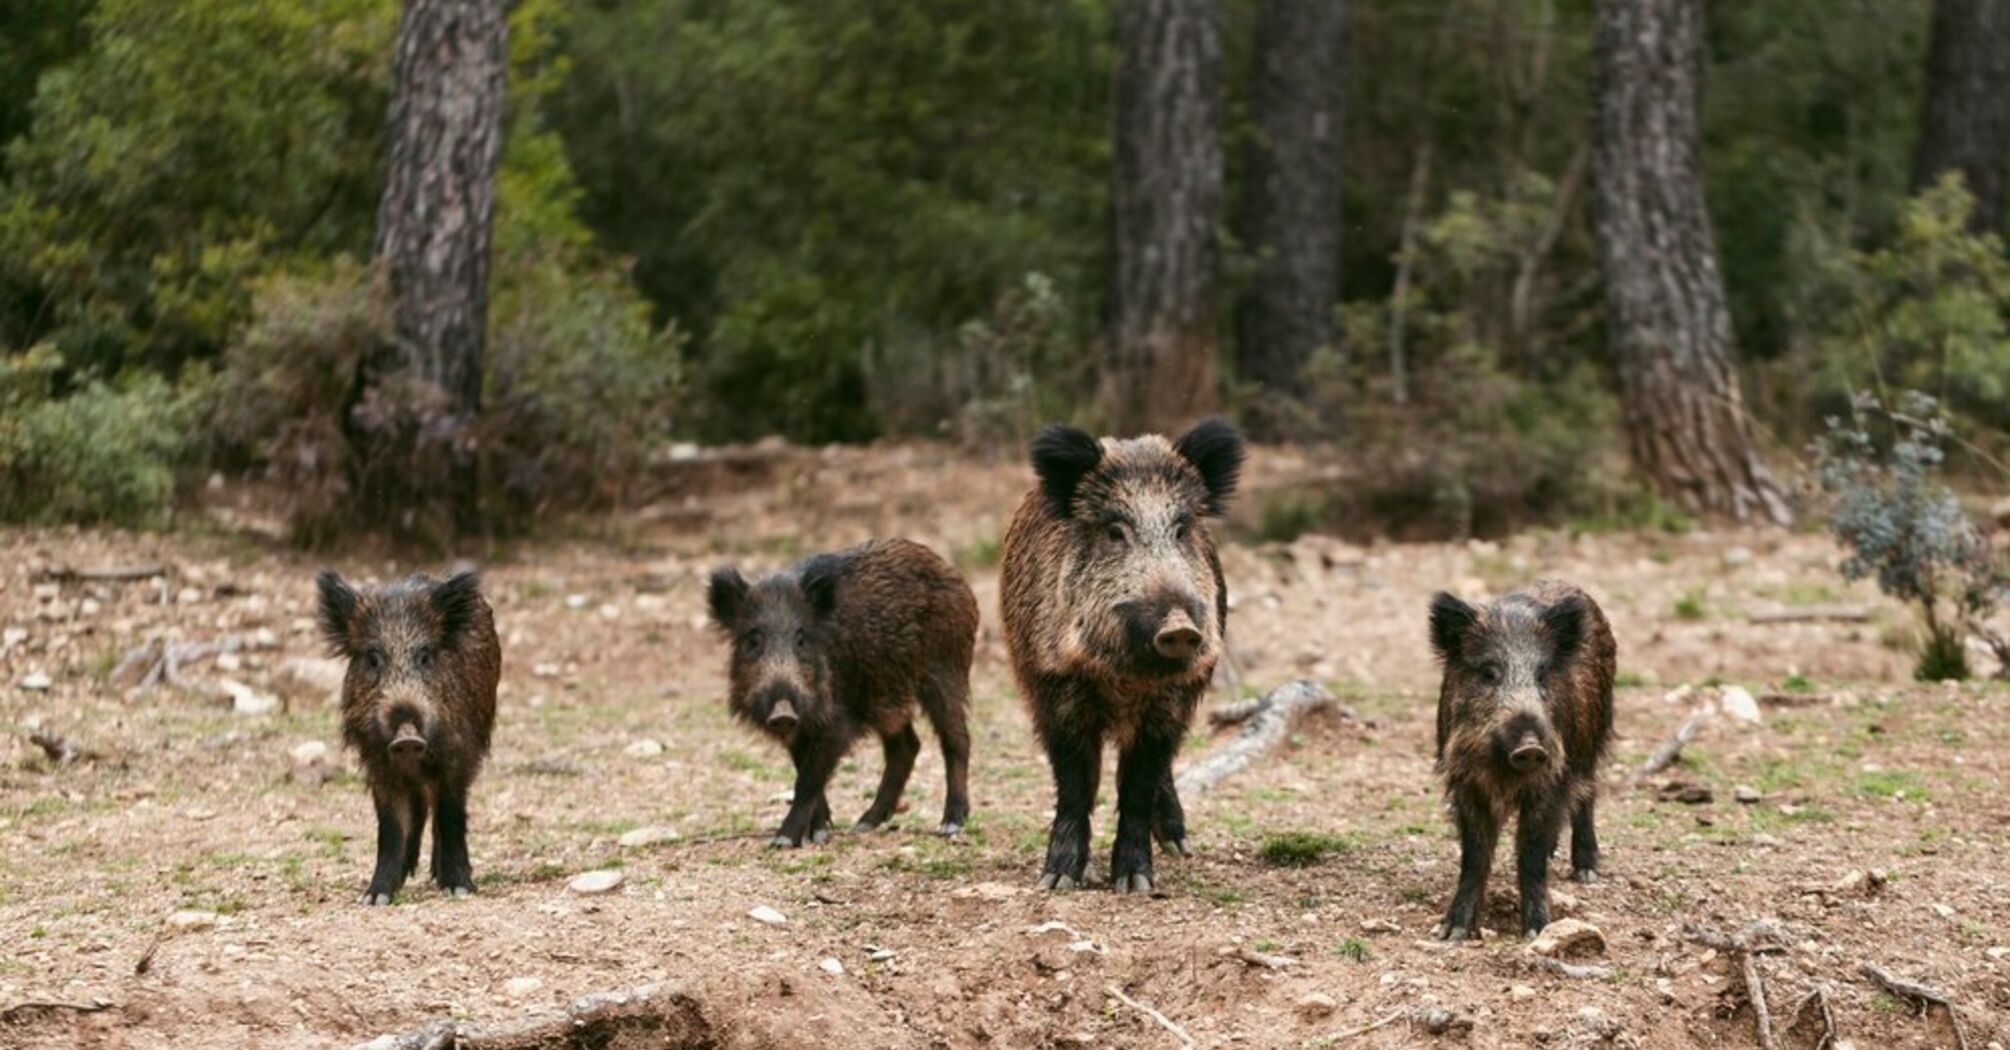 Spanish authorities are fighting the boar invasion in parks